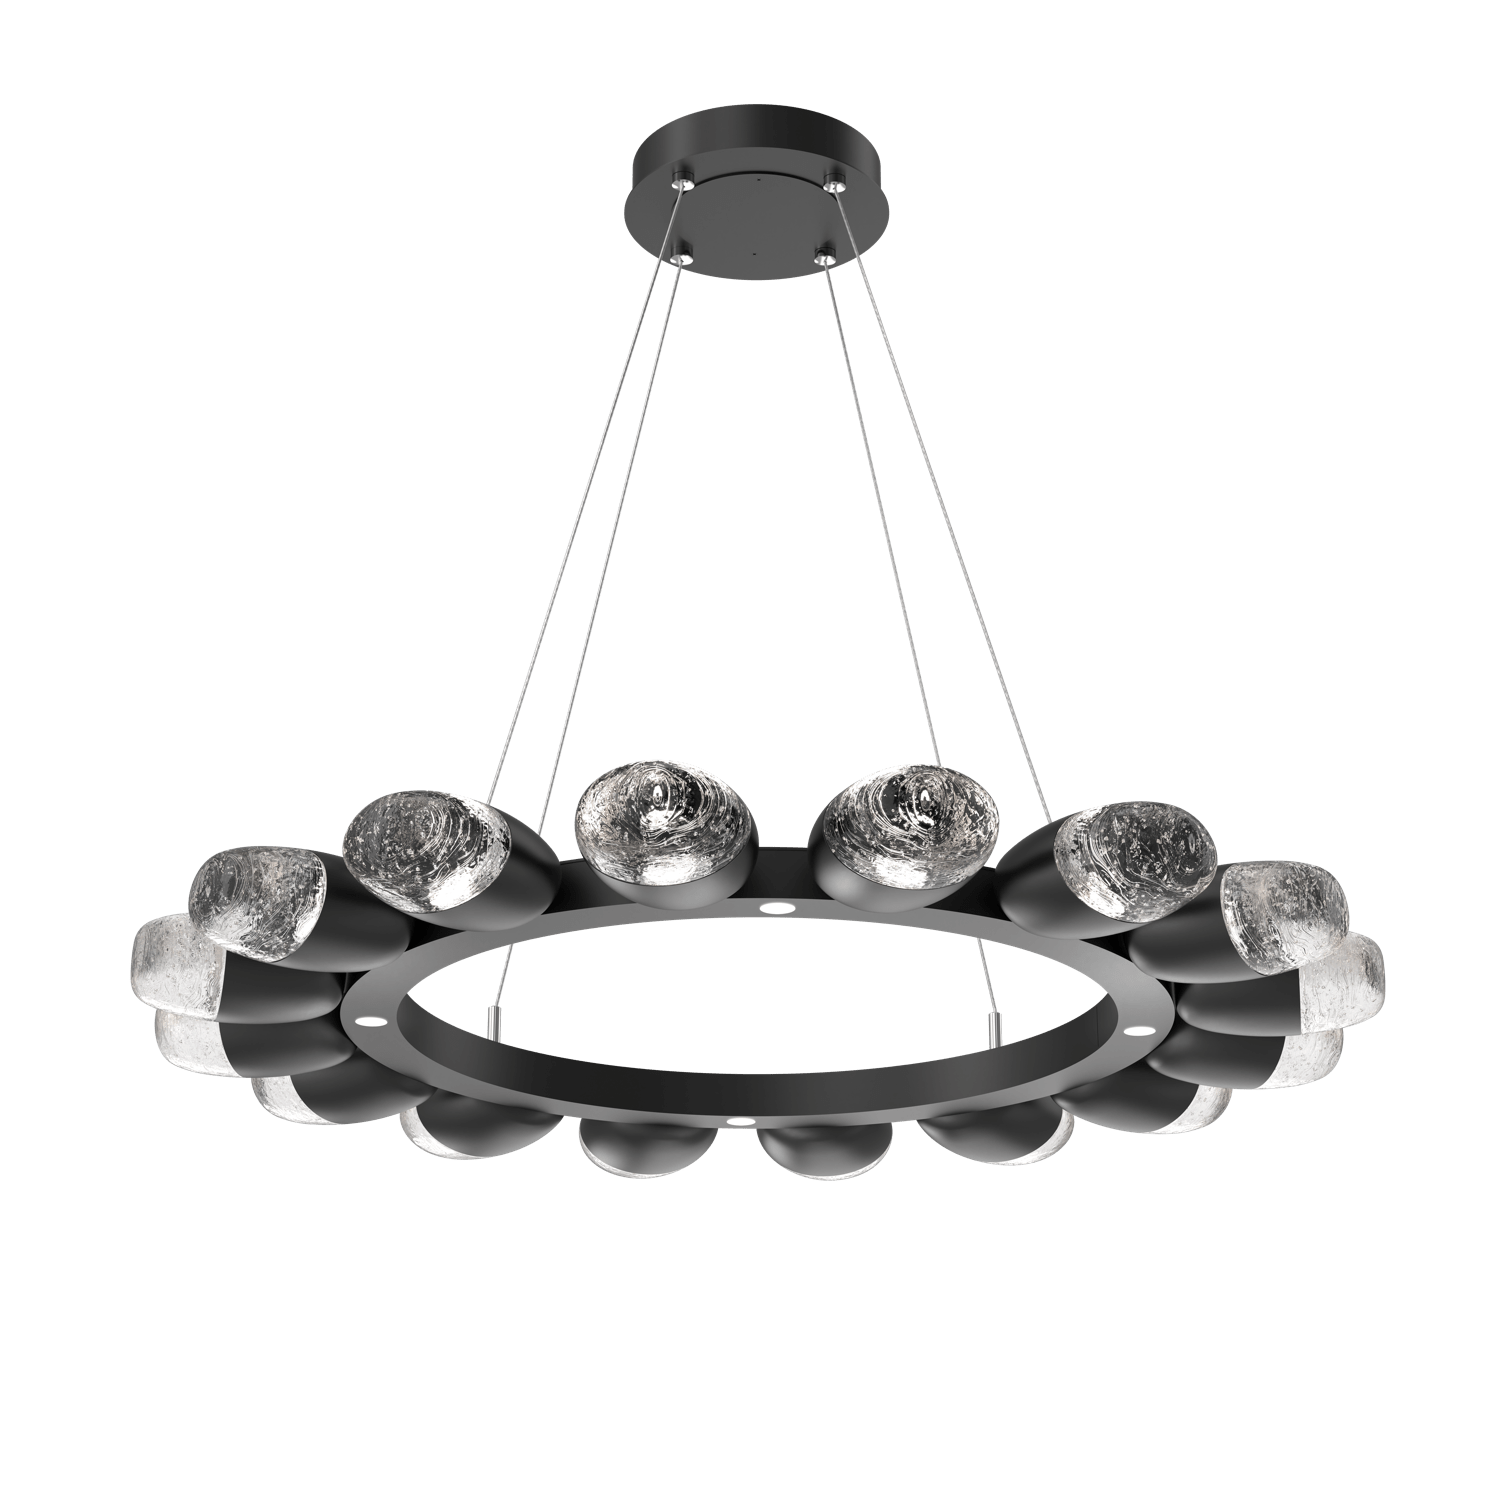 CHB0079-36-MB-Hammerton-Studio-Pebble-36-inch-radial-ring-chandelier-with-matte-black-finish-and-clear-cast-glass-shades-and-LED-lamping